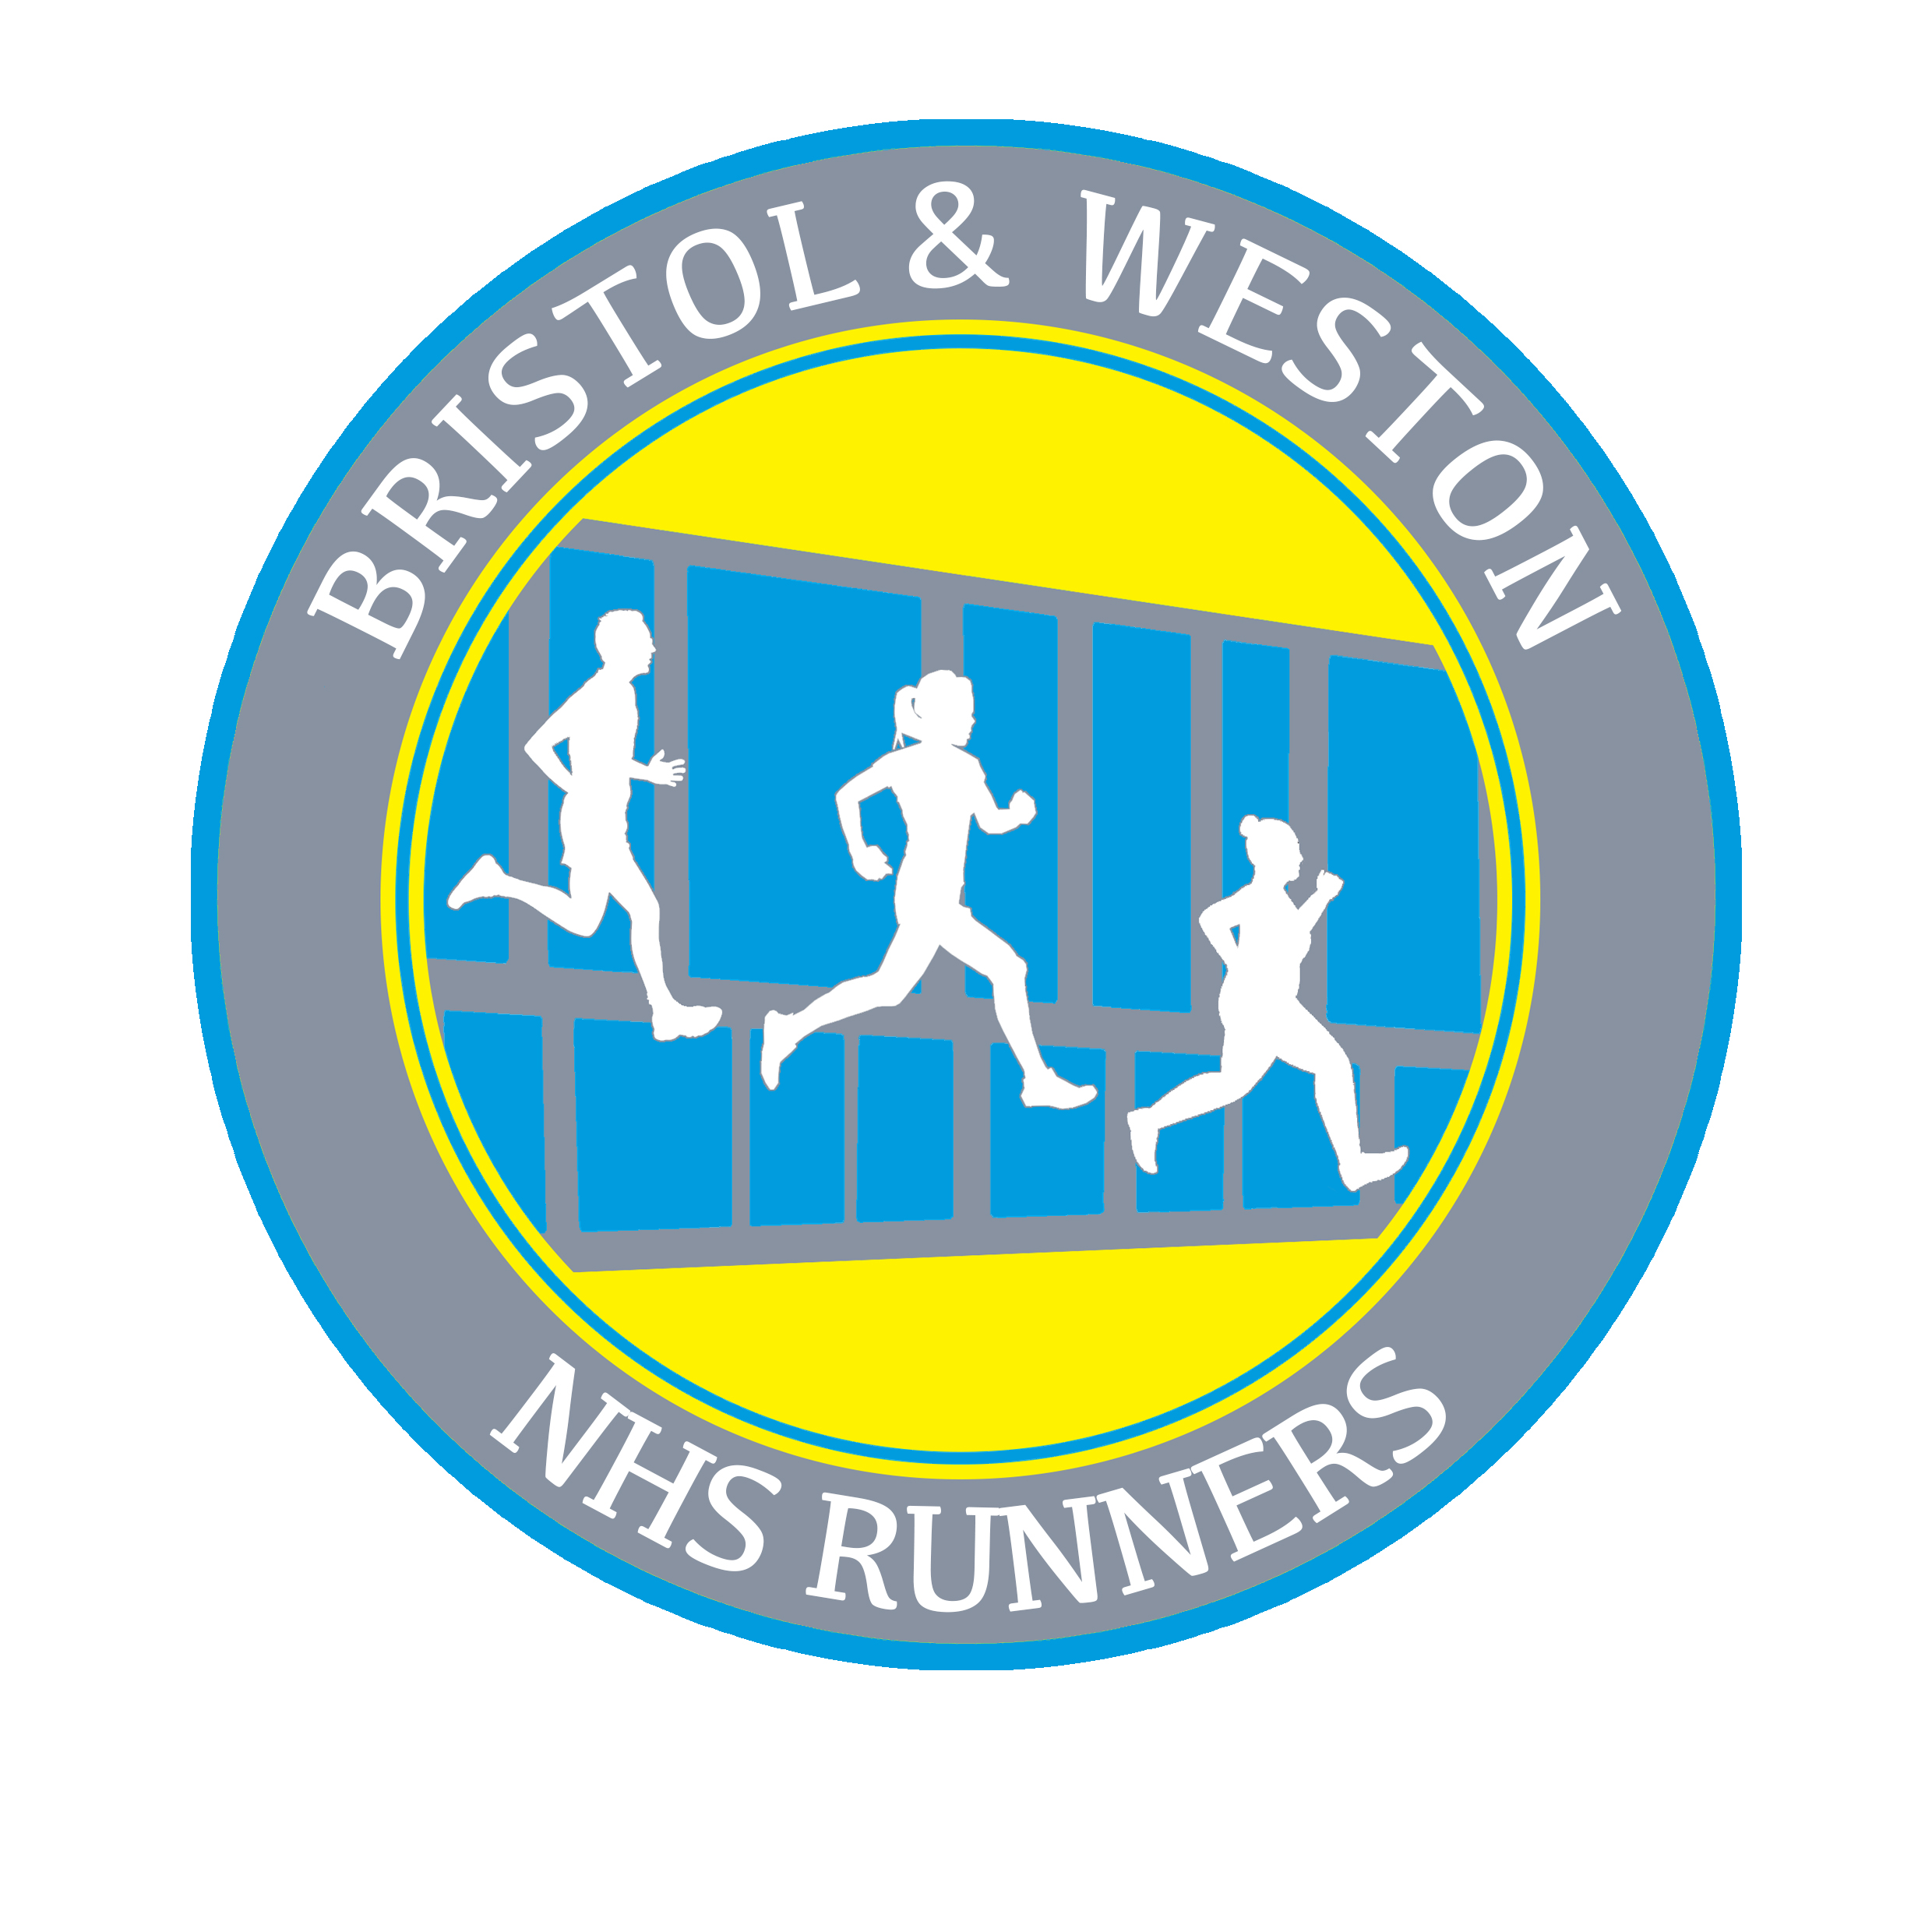 Bristol and Weston NHS Runners featured image